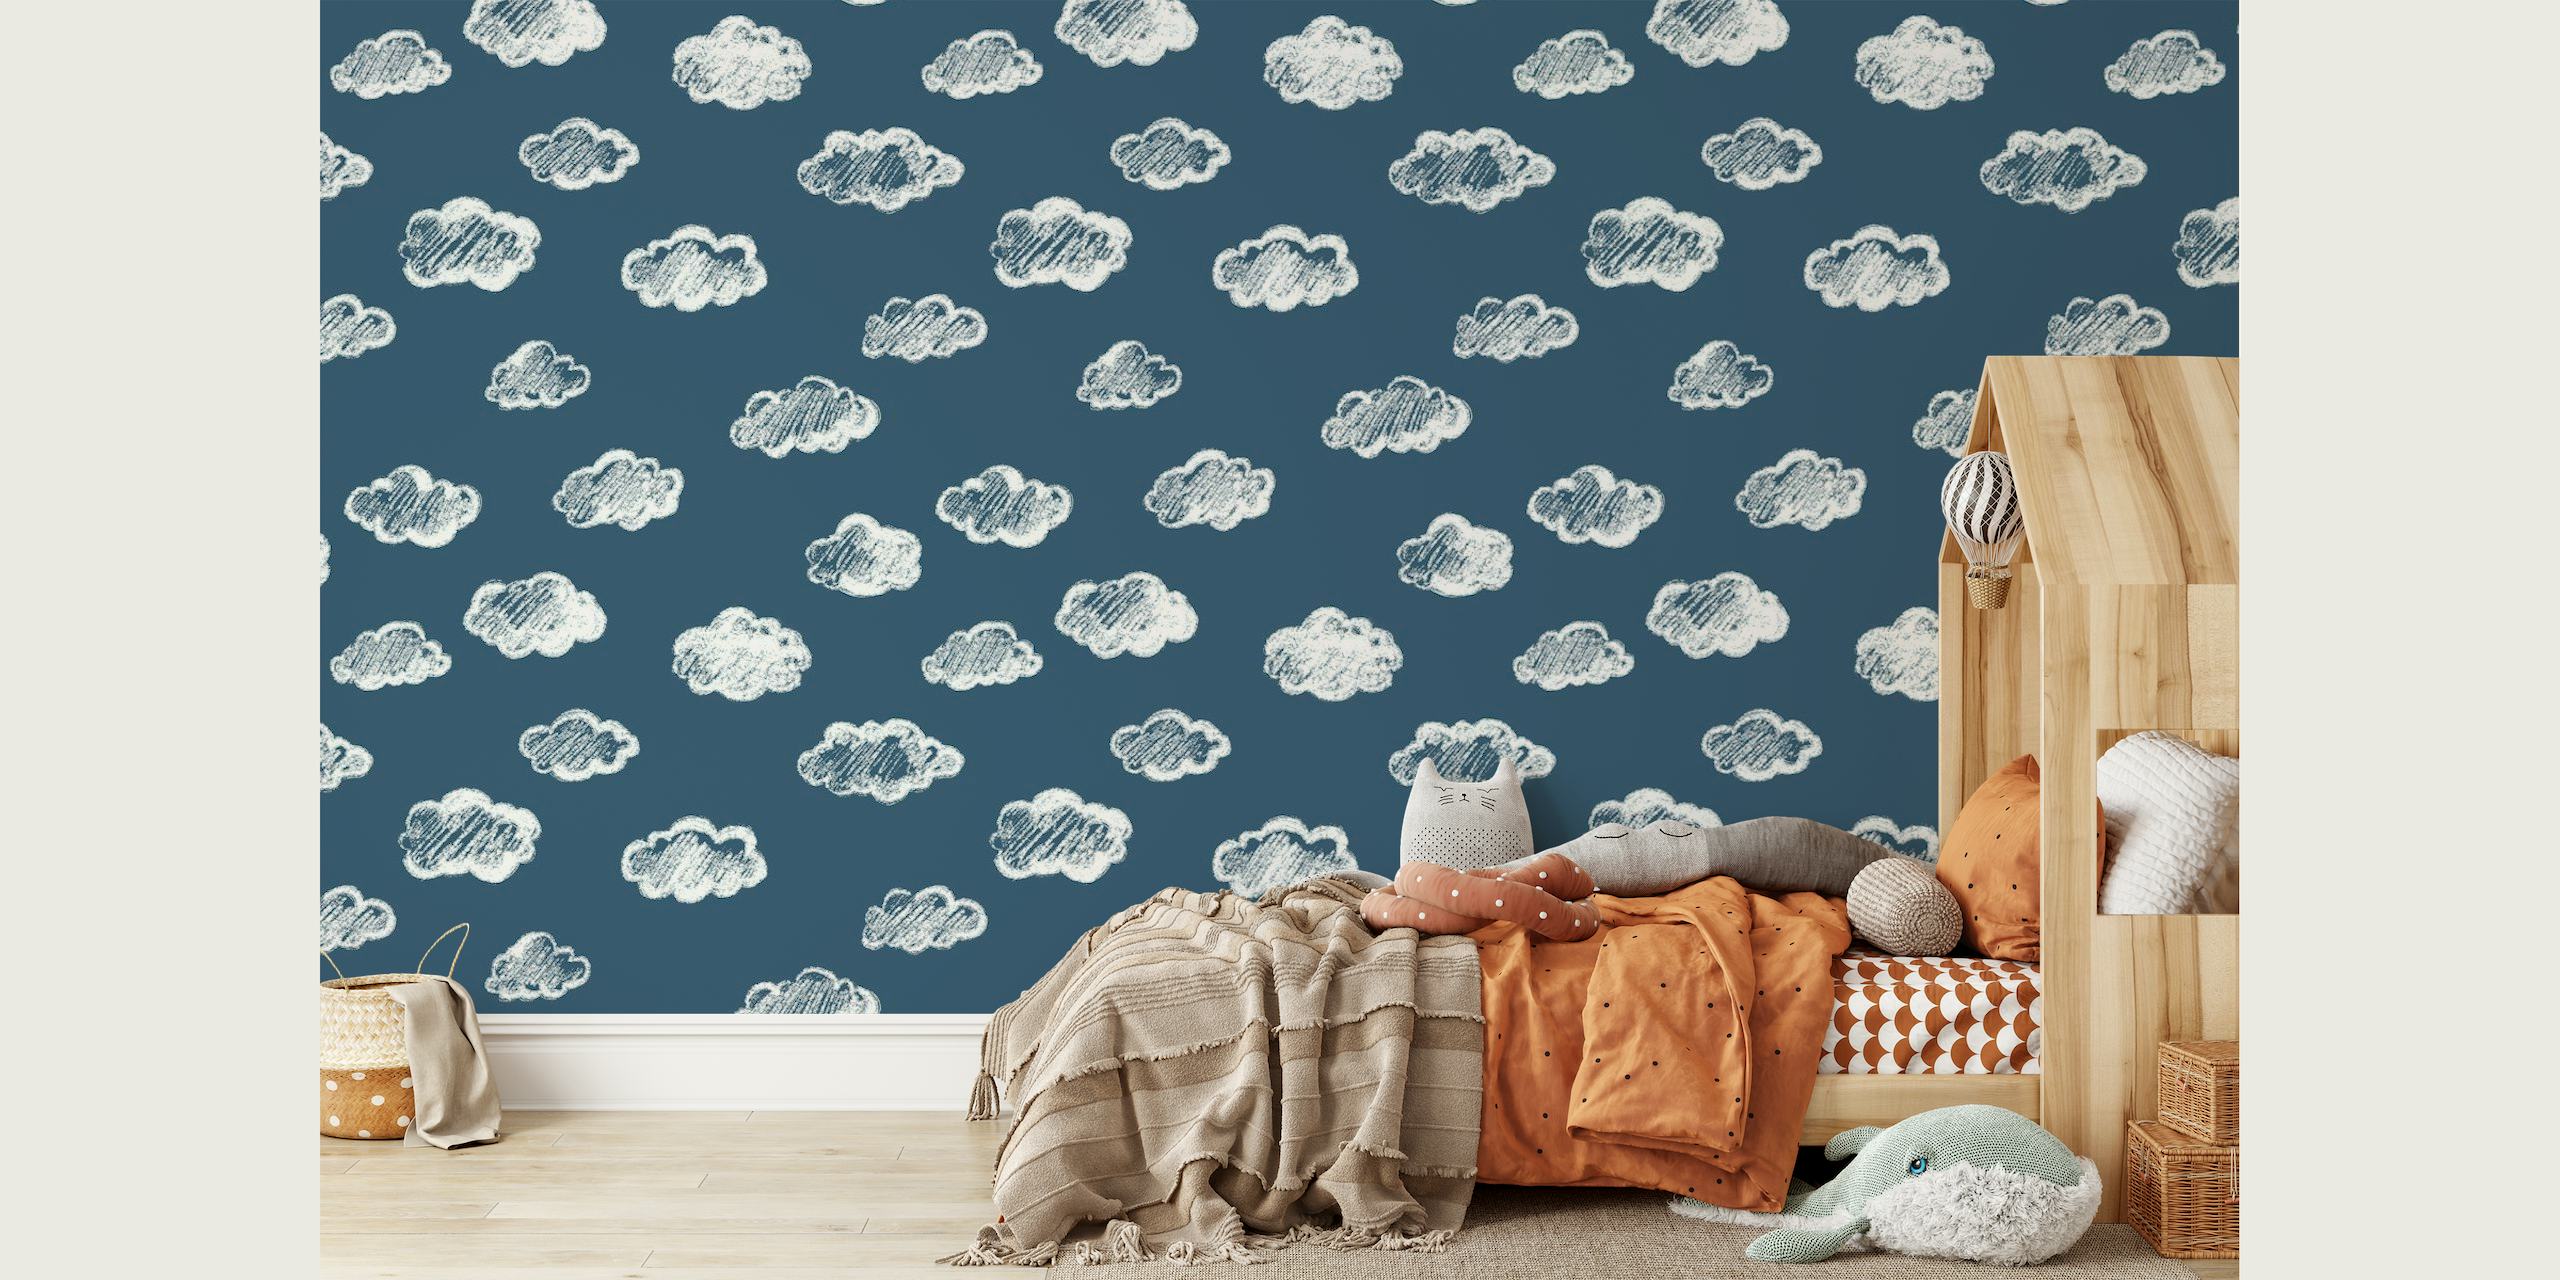 Chalk Clouds On Navy Blue behang